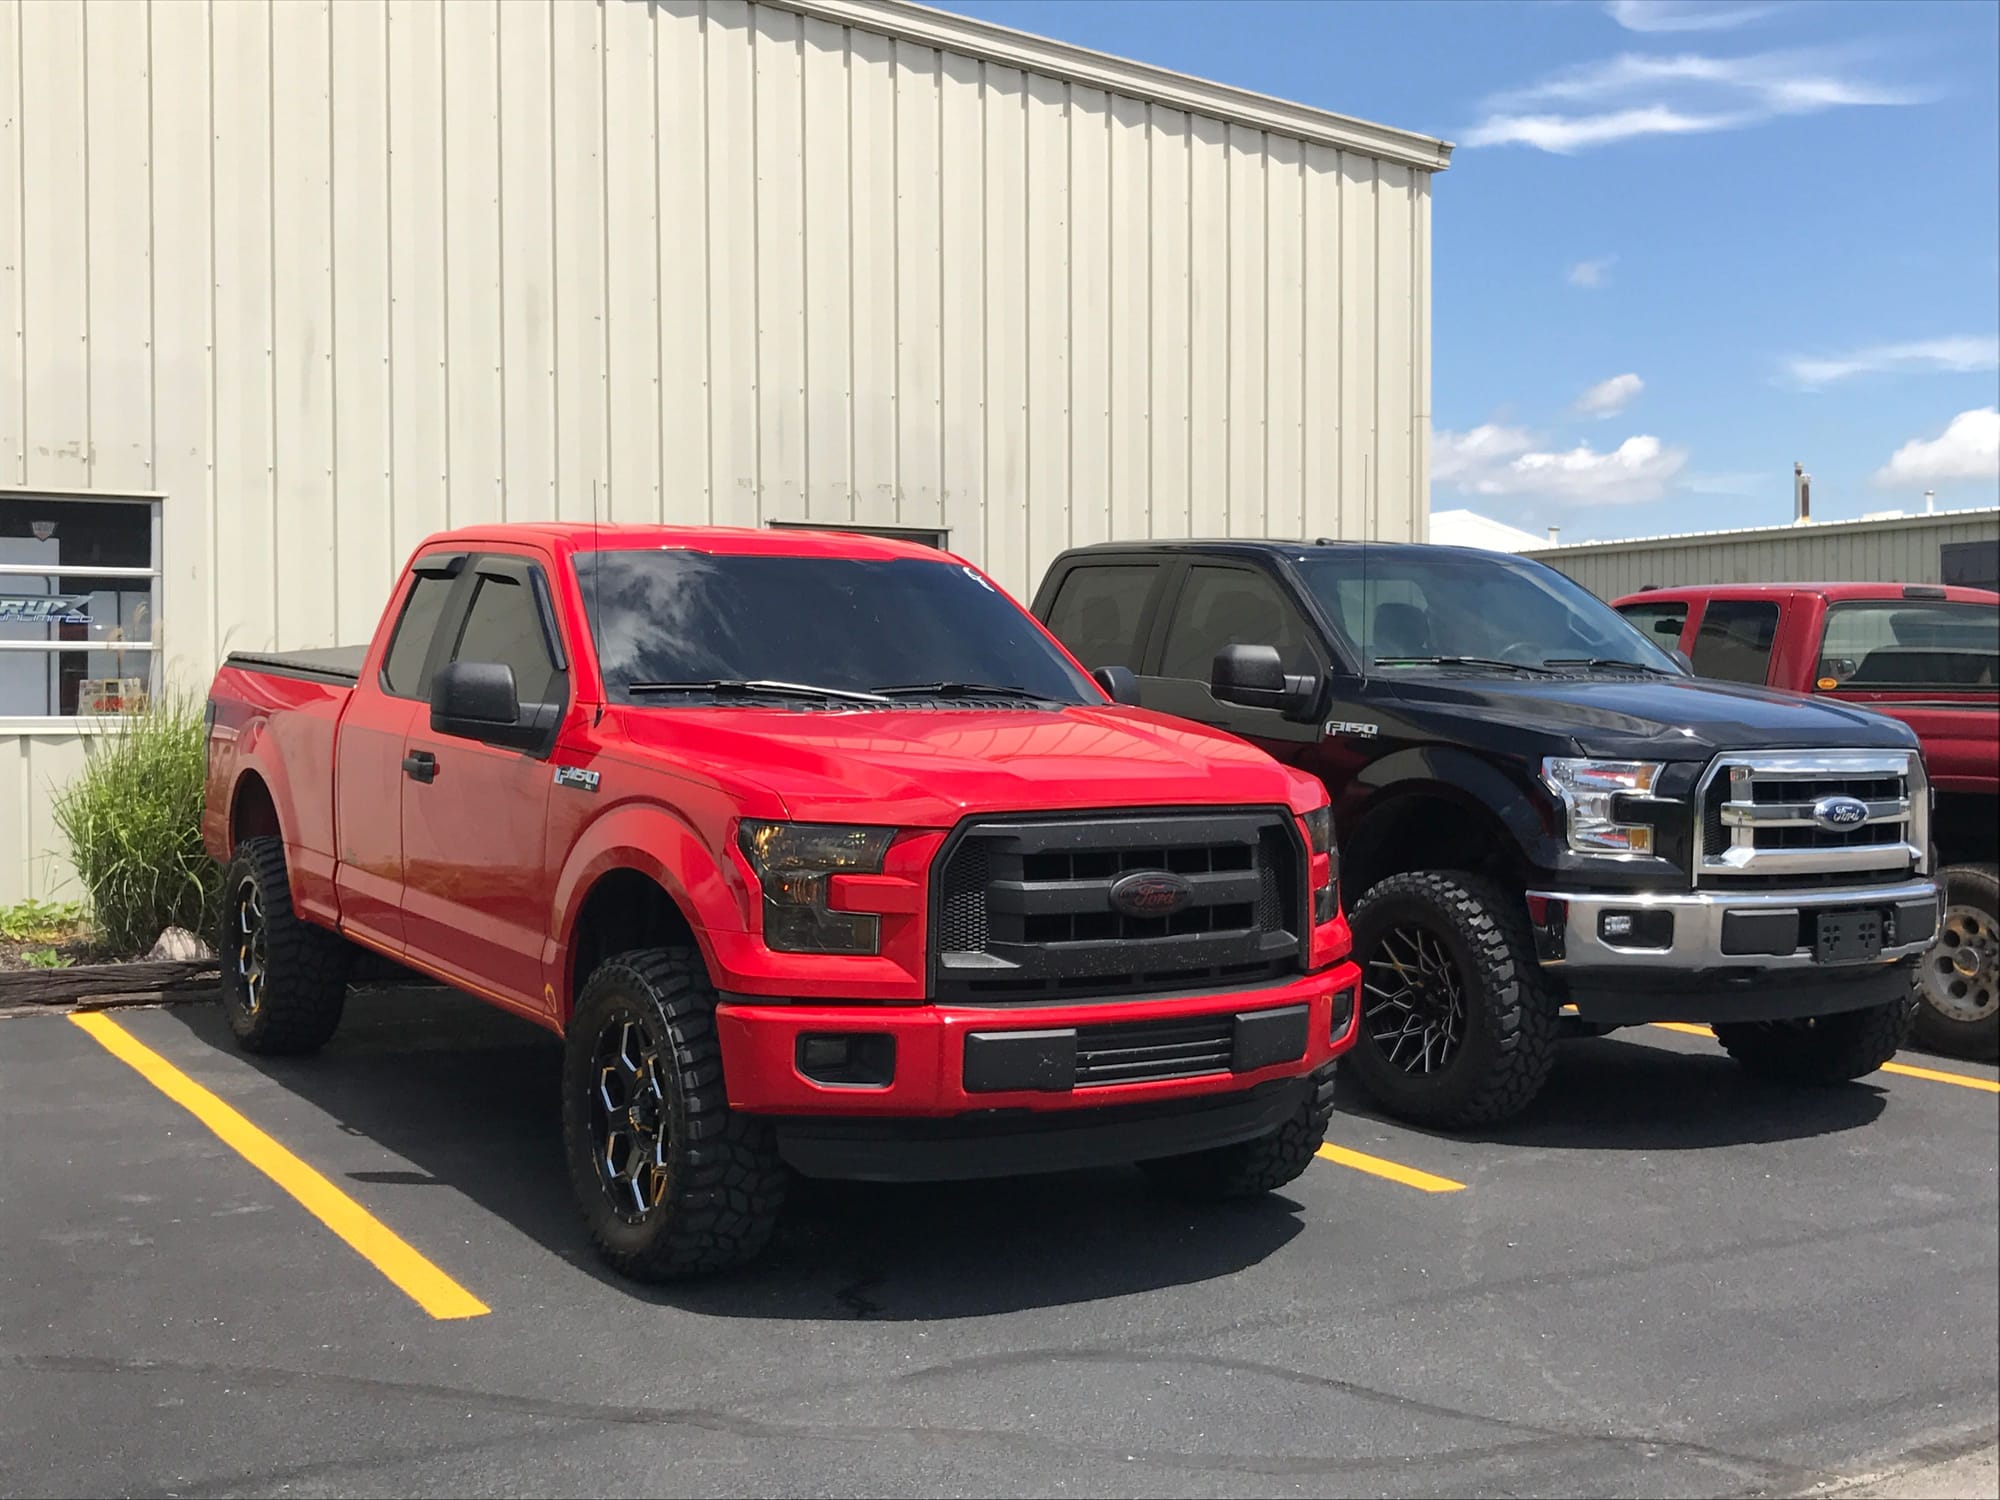 4 inch lift next to 6 inch - Ford F150 Forum - Community of Ford Truck Fans 4 Inch Lift Vs 6 Inch Lift